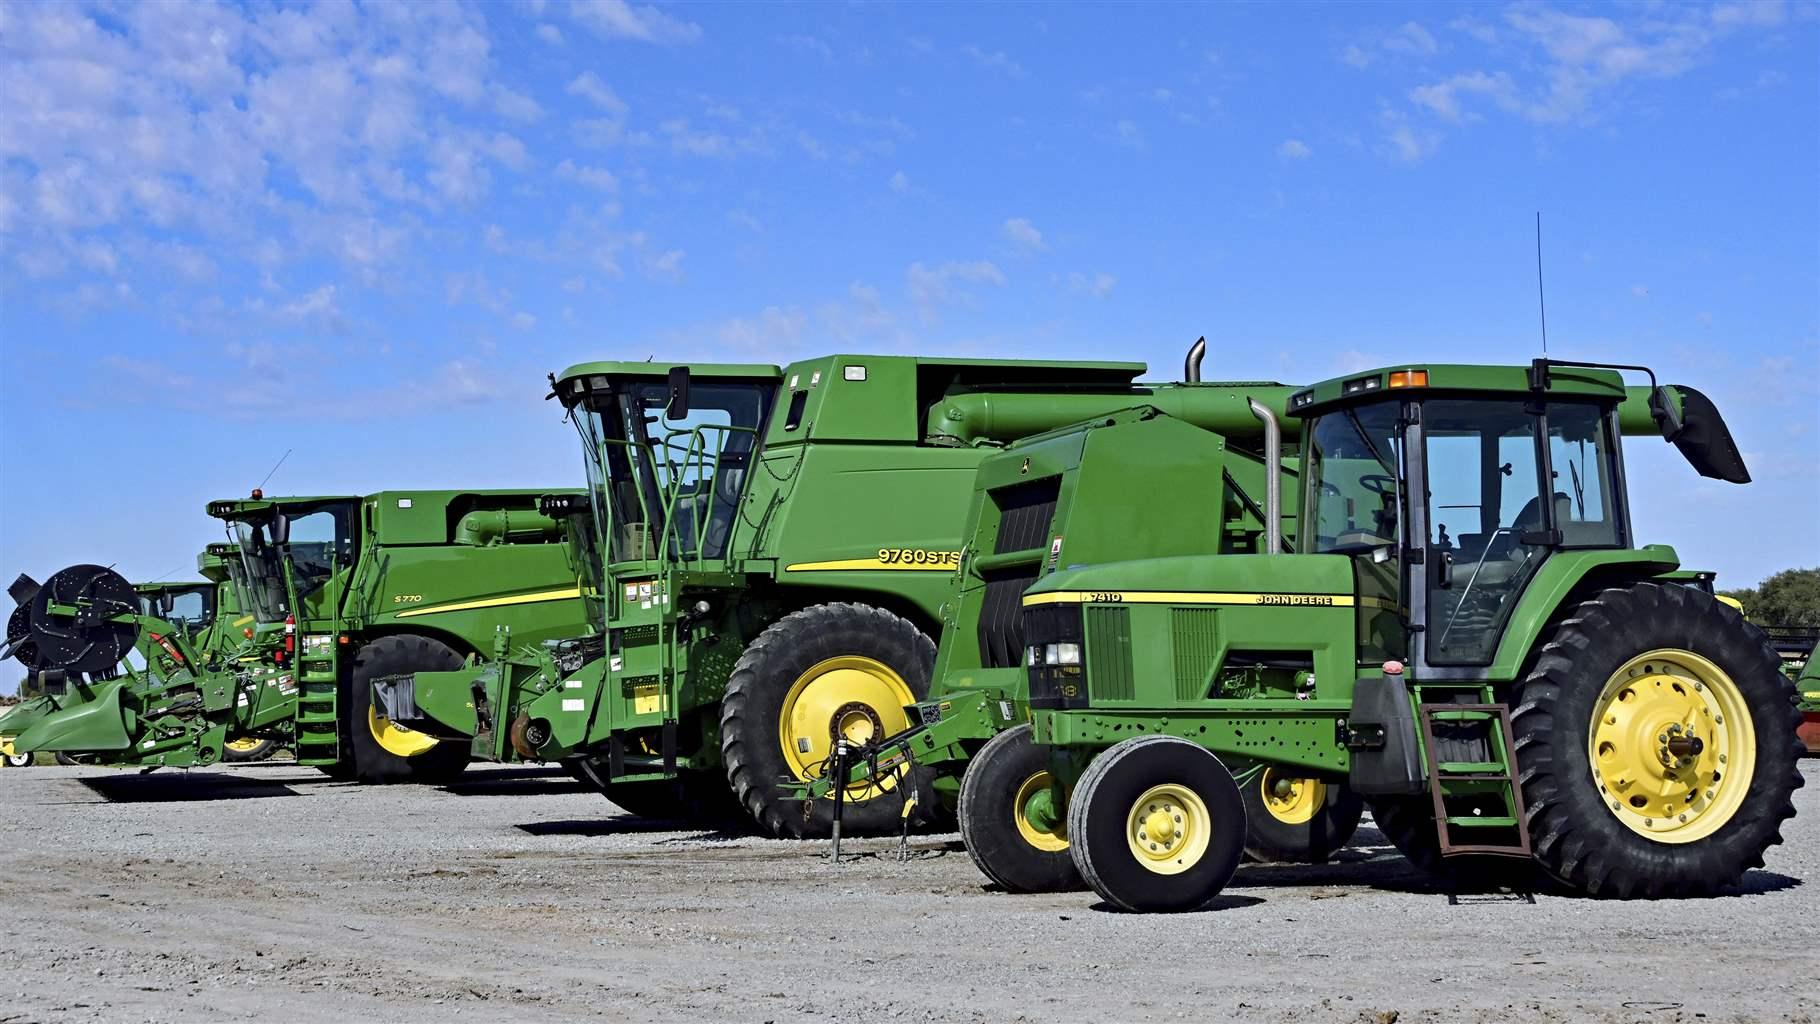 Brand new farm machinery, including tractors, combines, balers, cutter heads lined up for sale outside Prairieland Partners John Deere dealership during the first strike by John Deere workers in 35 years in Emporia, Kansas on October 14, 2021.